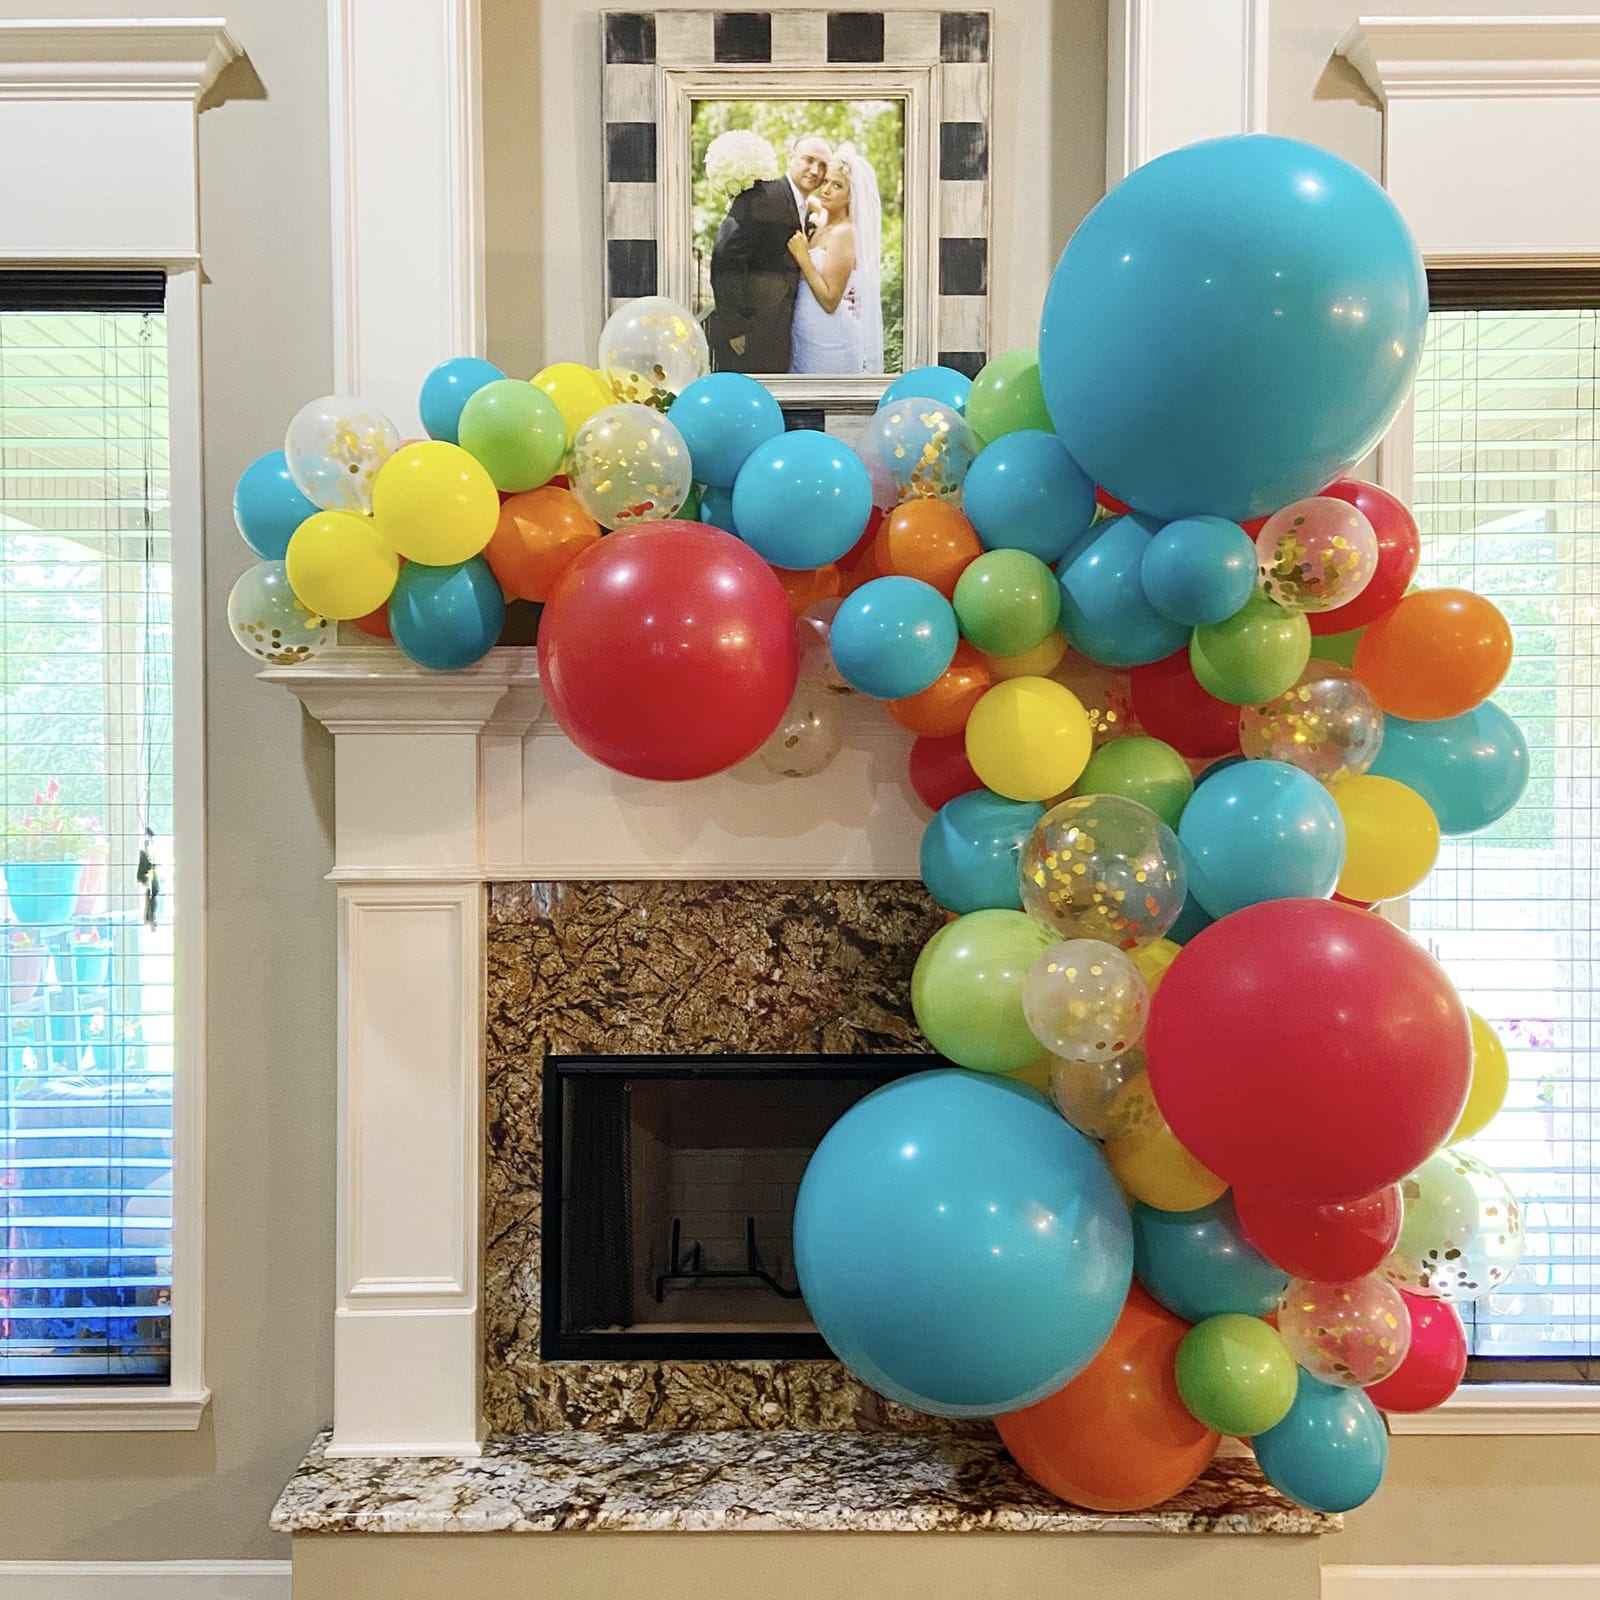 Make a mantle gorgeous with a balloon garland installation like this one for a Benton birthday with confetti balloons from Just Peachy.